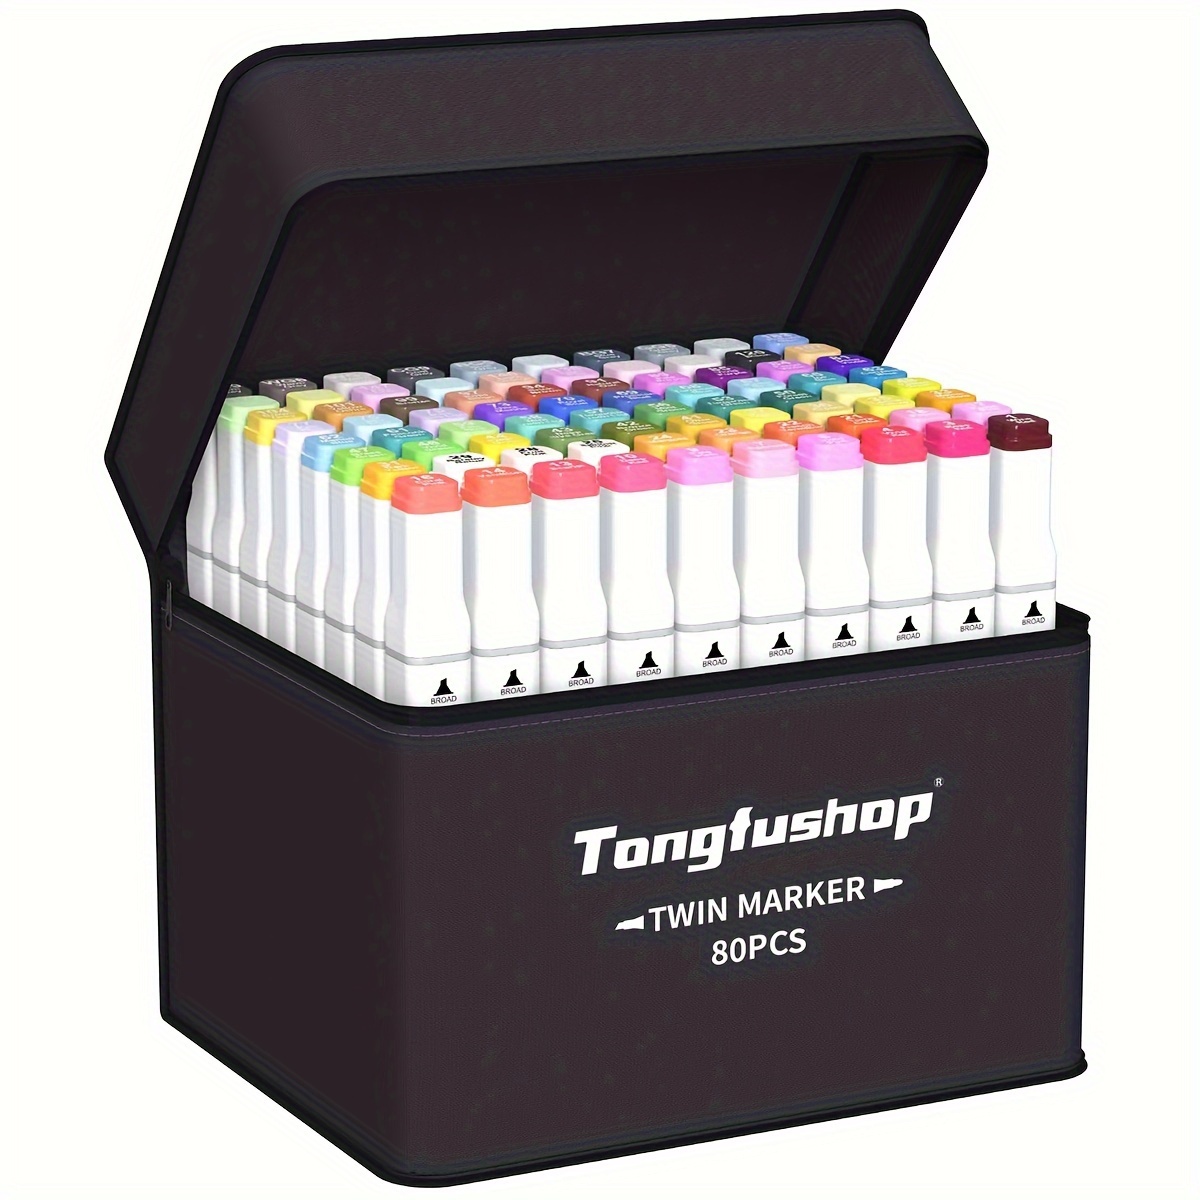 

Tongfushop 80 Colors Alcohol Markers, Double Tip Blender Art Drawing Markers Set, Professional Permanent Sketch Markers For Adult Coloring Illustrations With Organizing Case, Pad